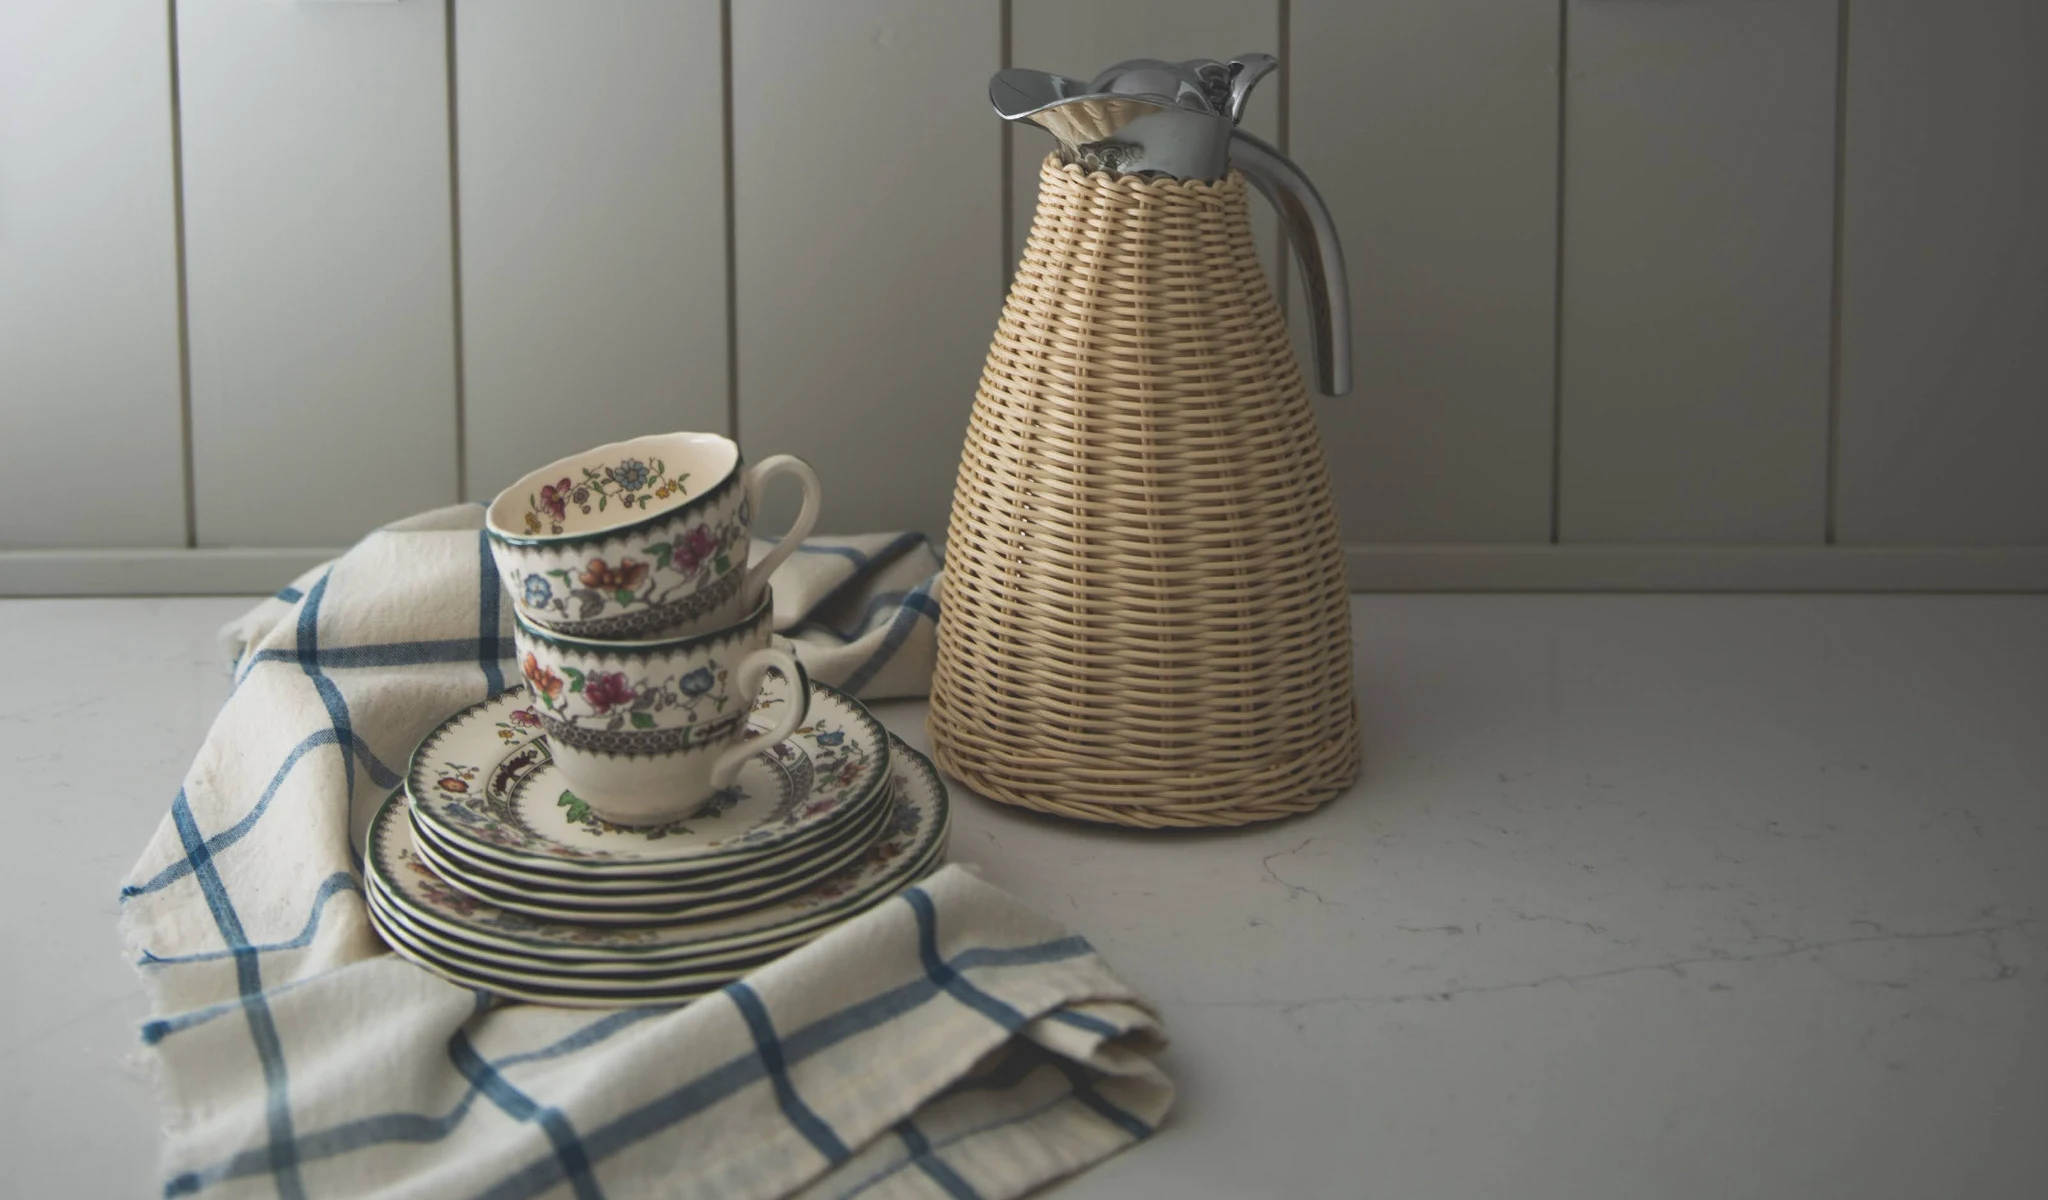 A wicker basket with a cup and saucer on a table, with a custom home builder's design touch.